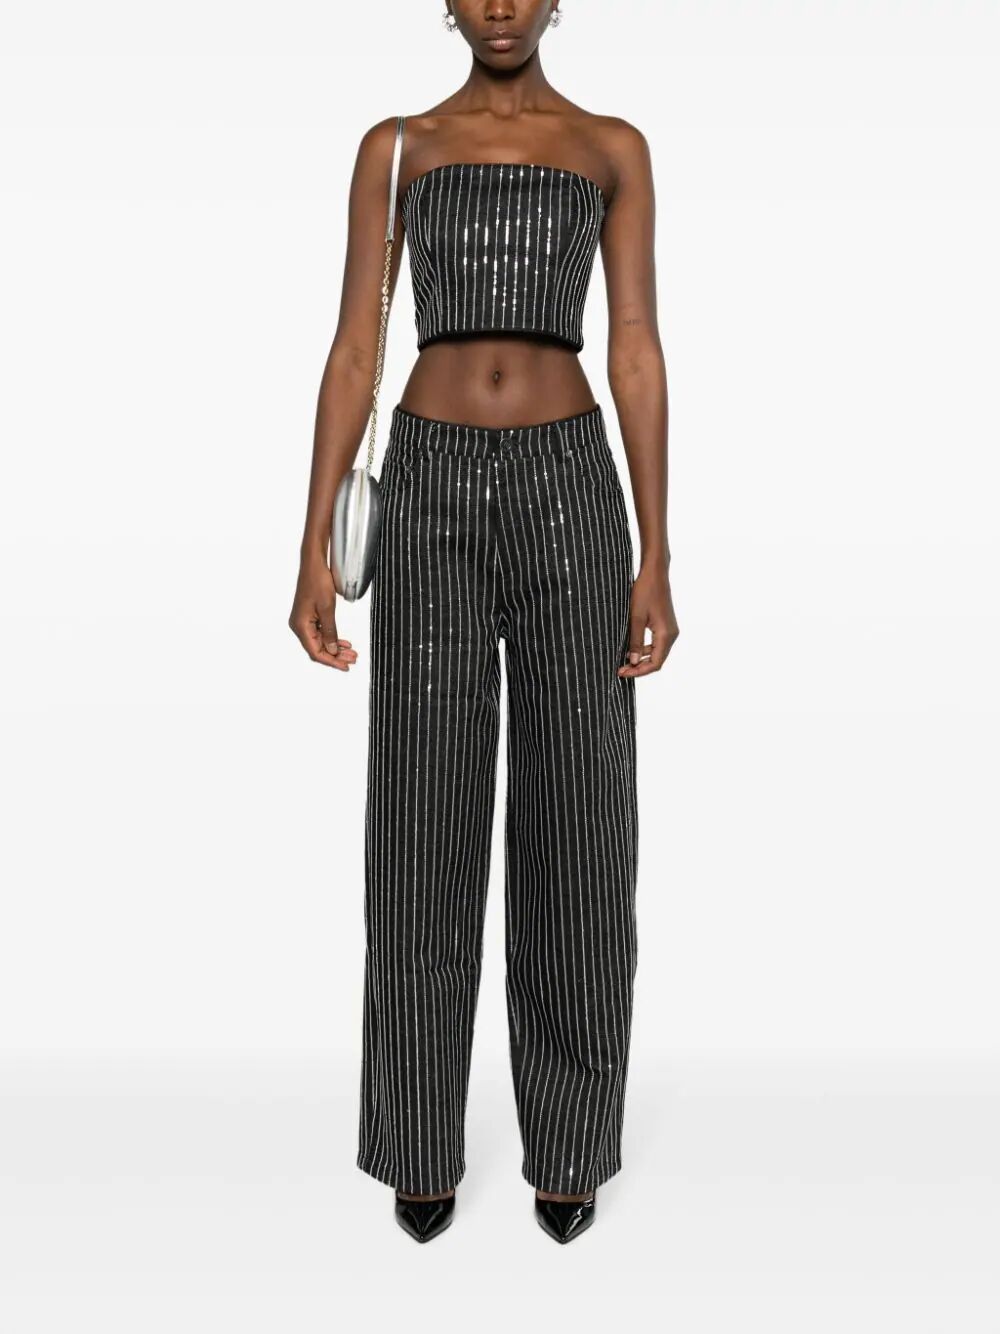 Sequin Twill Wide Pants